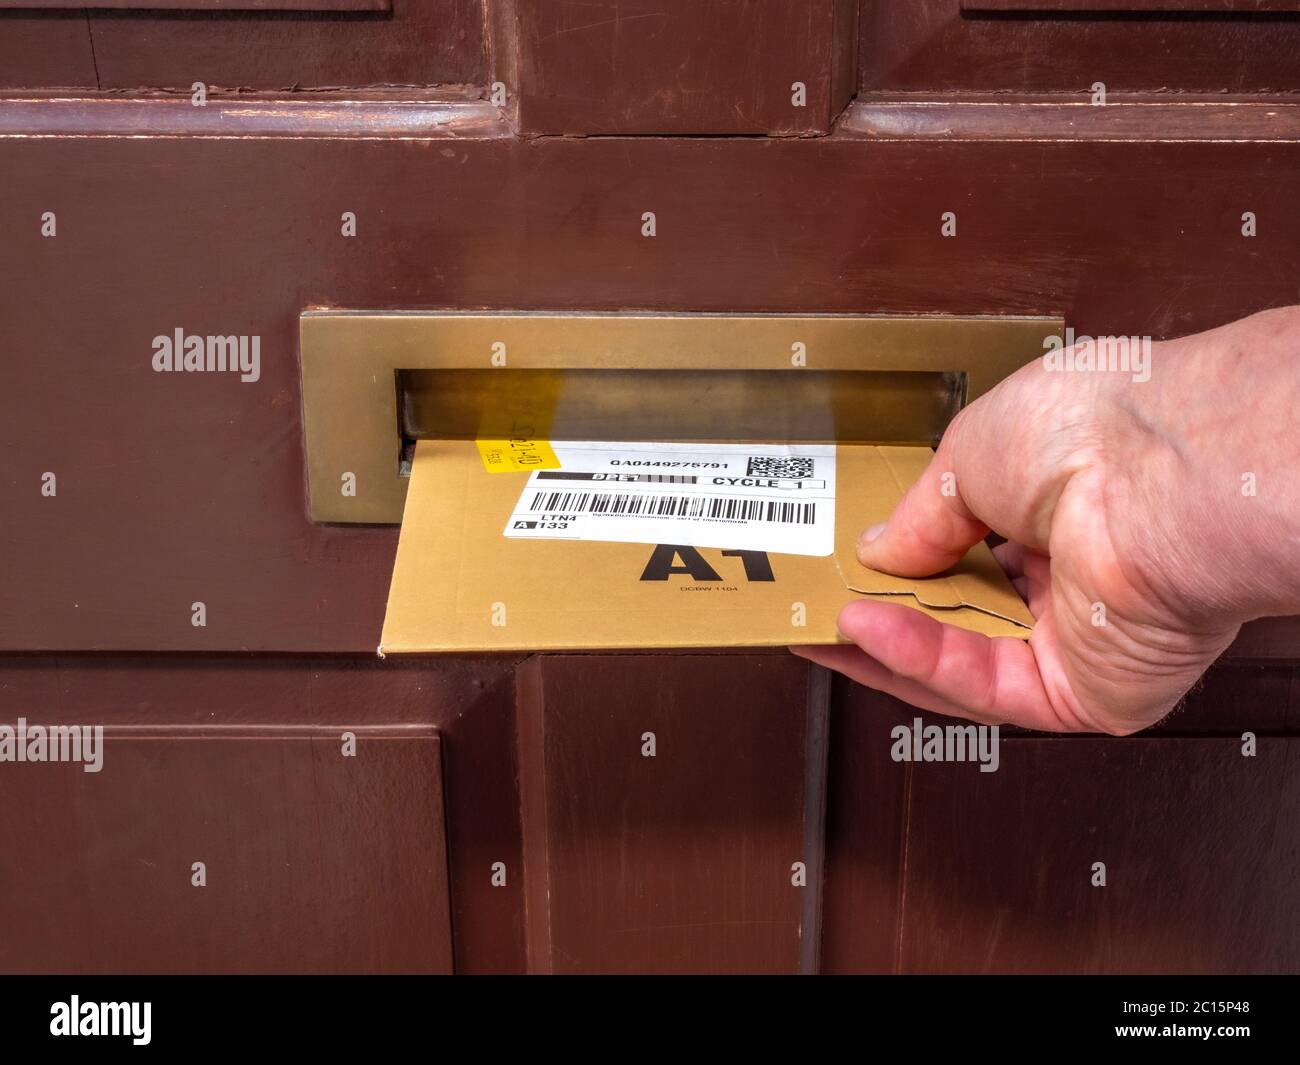 A man’s hand pushing a flat cardboard packet with label from the delivery / shipping company, through the brass letterbox of an old wooden front door. Stock Photo